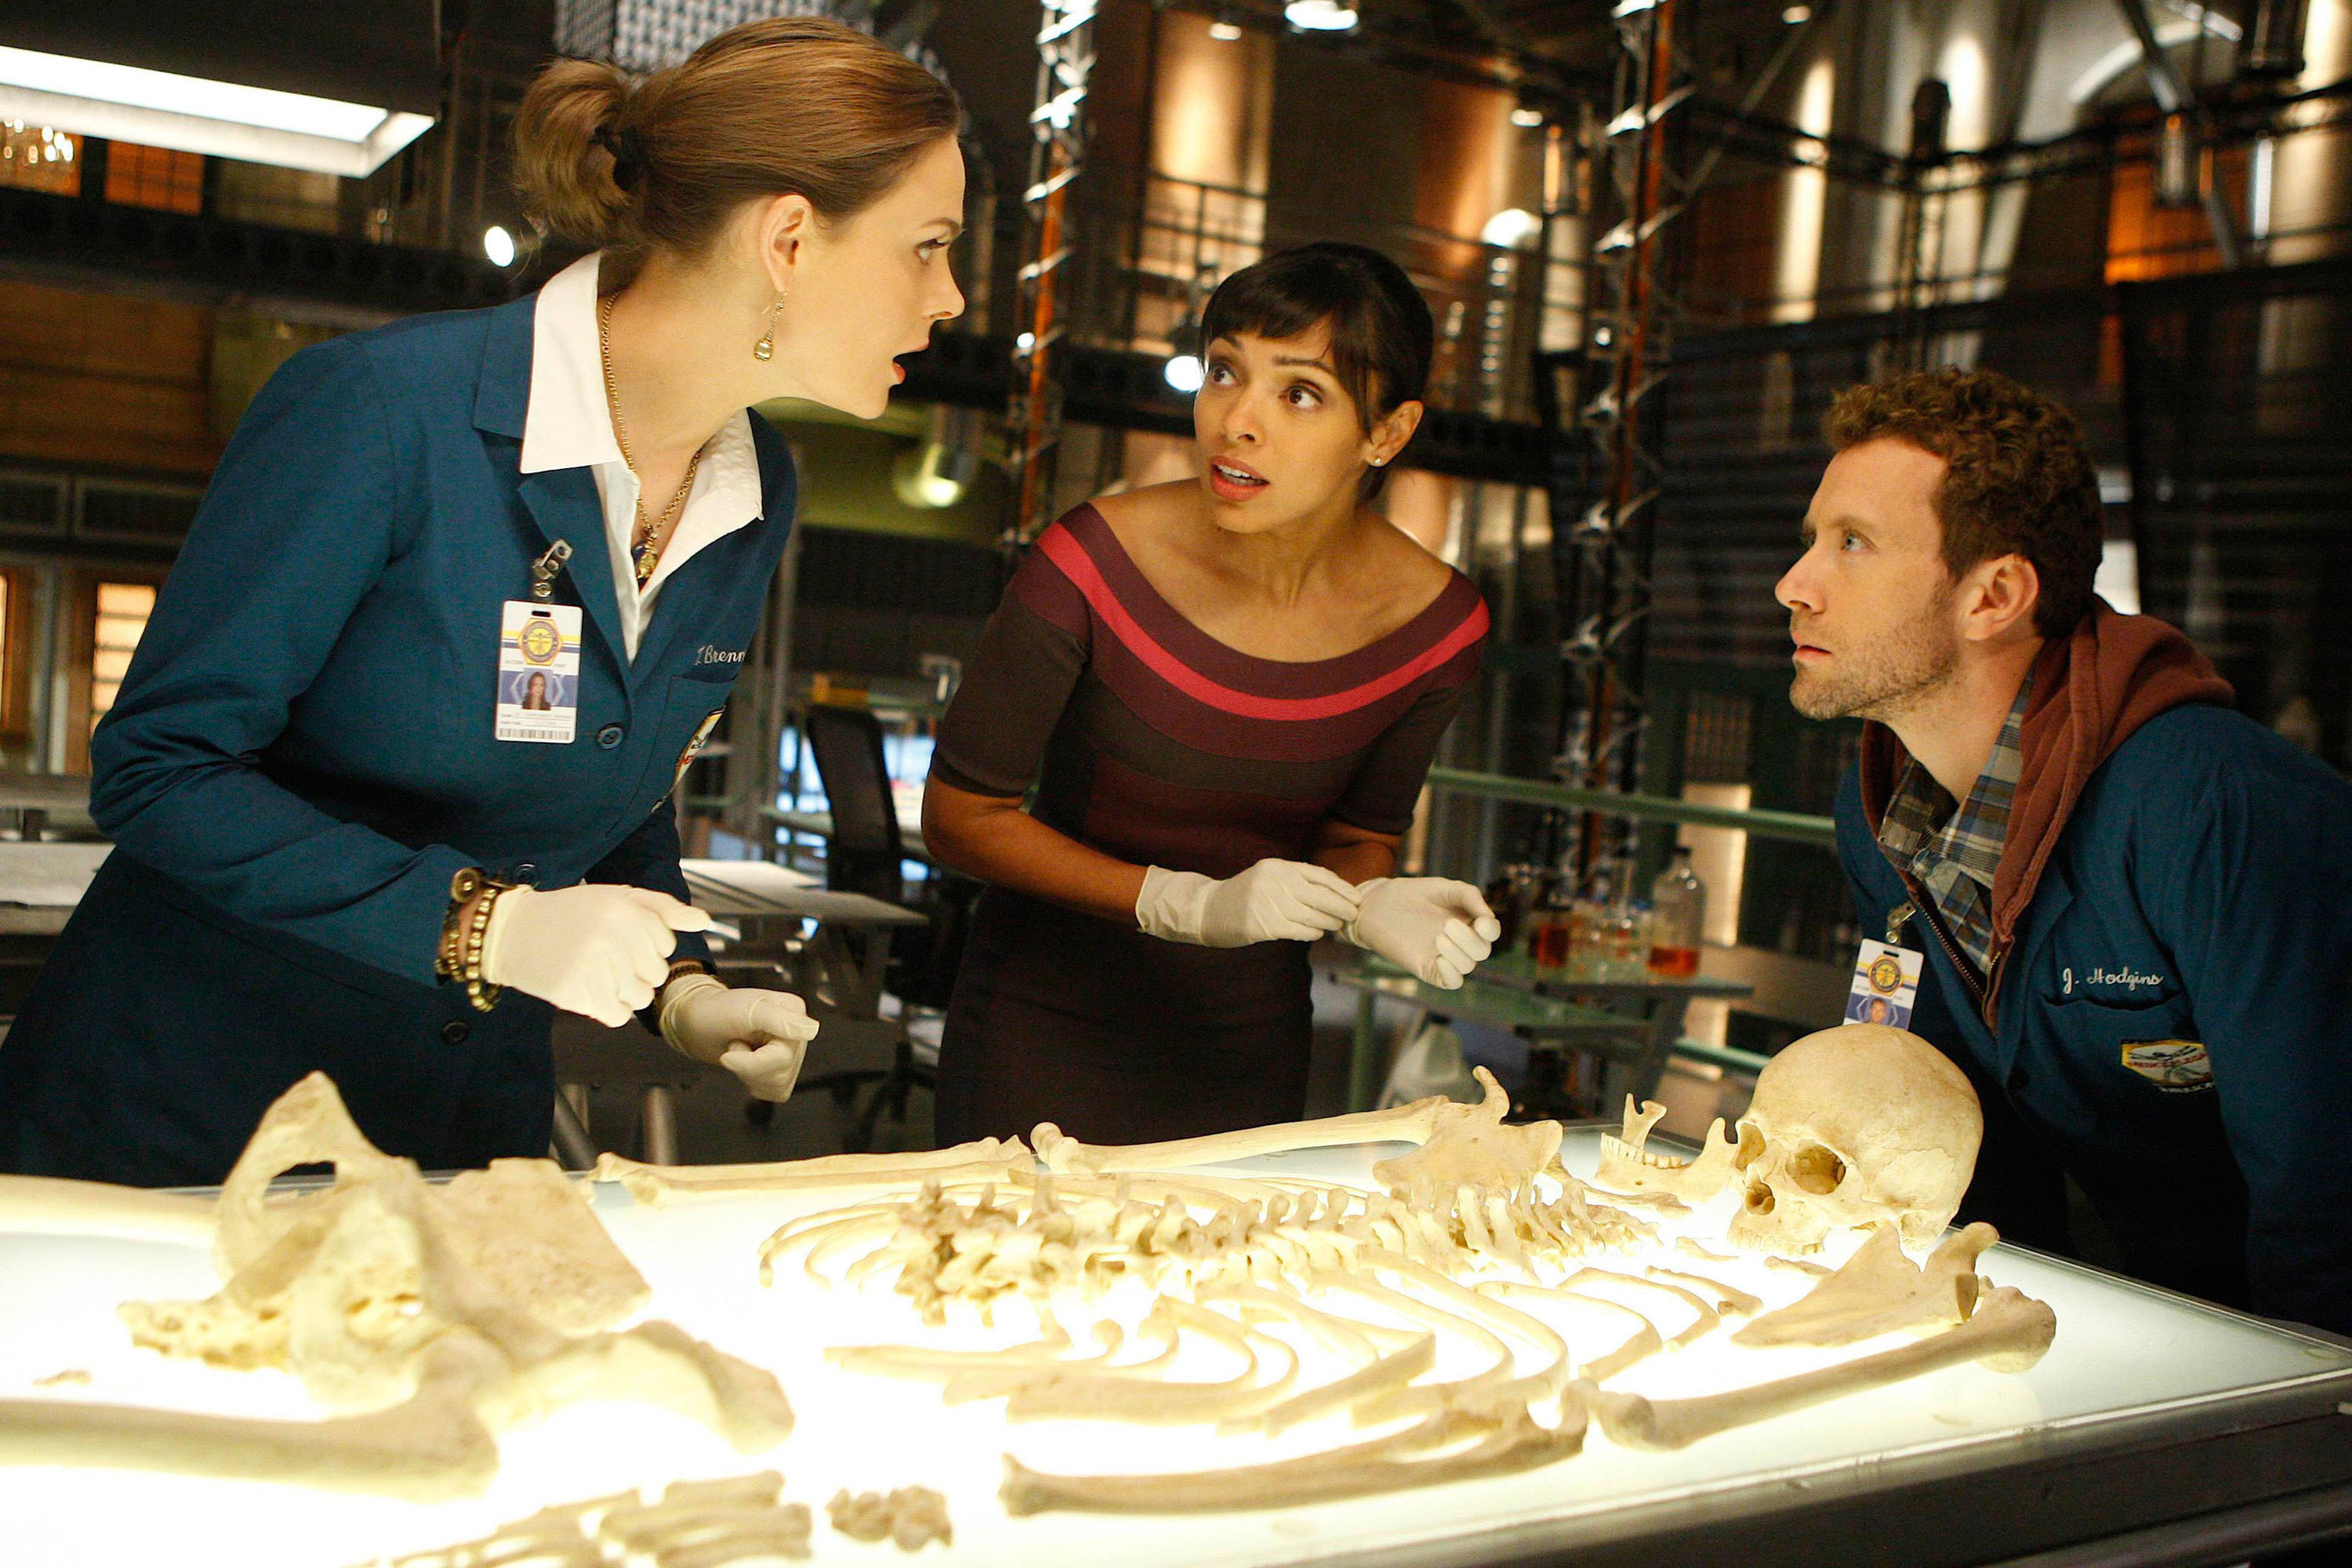 Dr. Camille Saroyan ran over 200 episodes, despite the fact she was intended to be killed off after a small story arc on Bones.